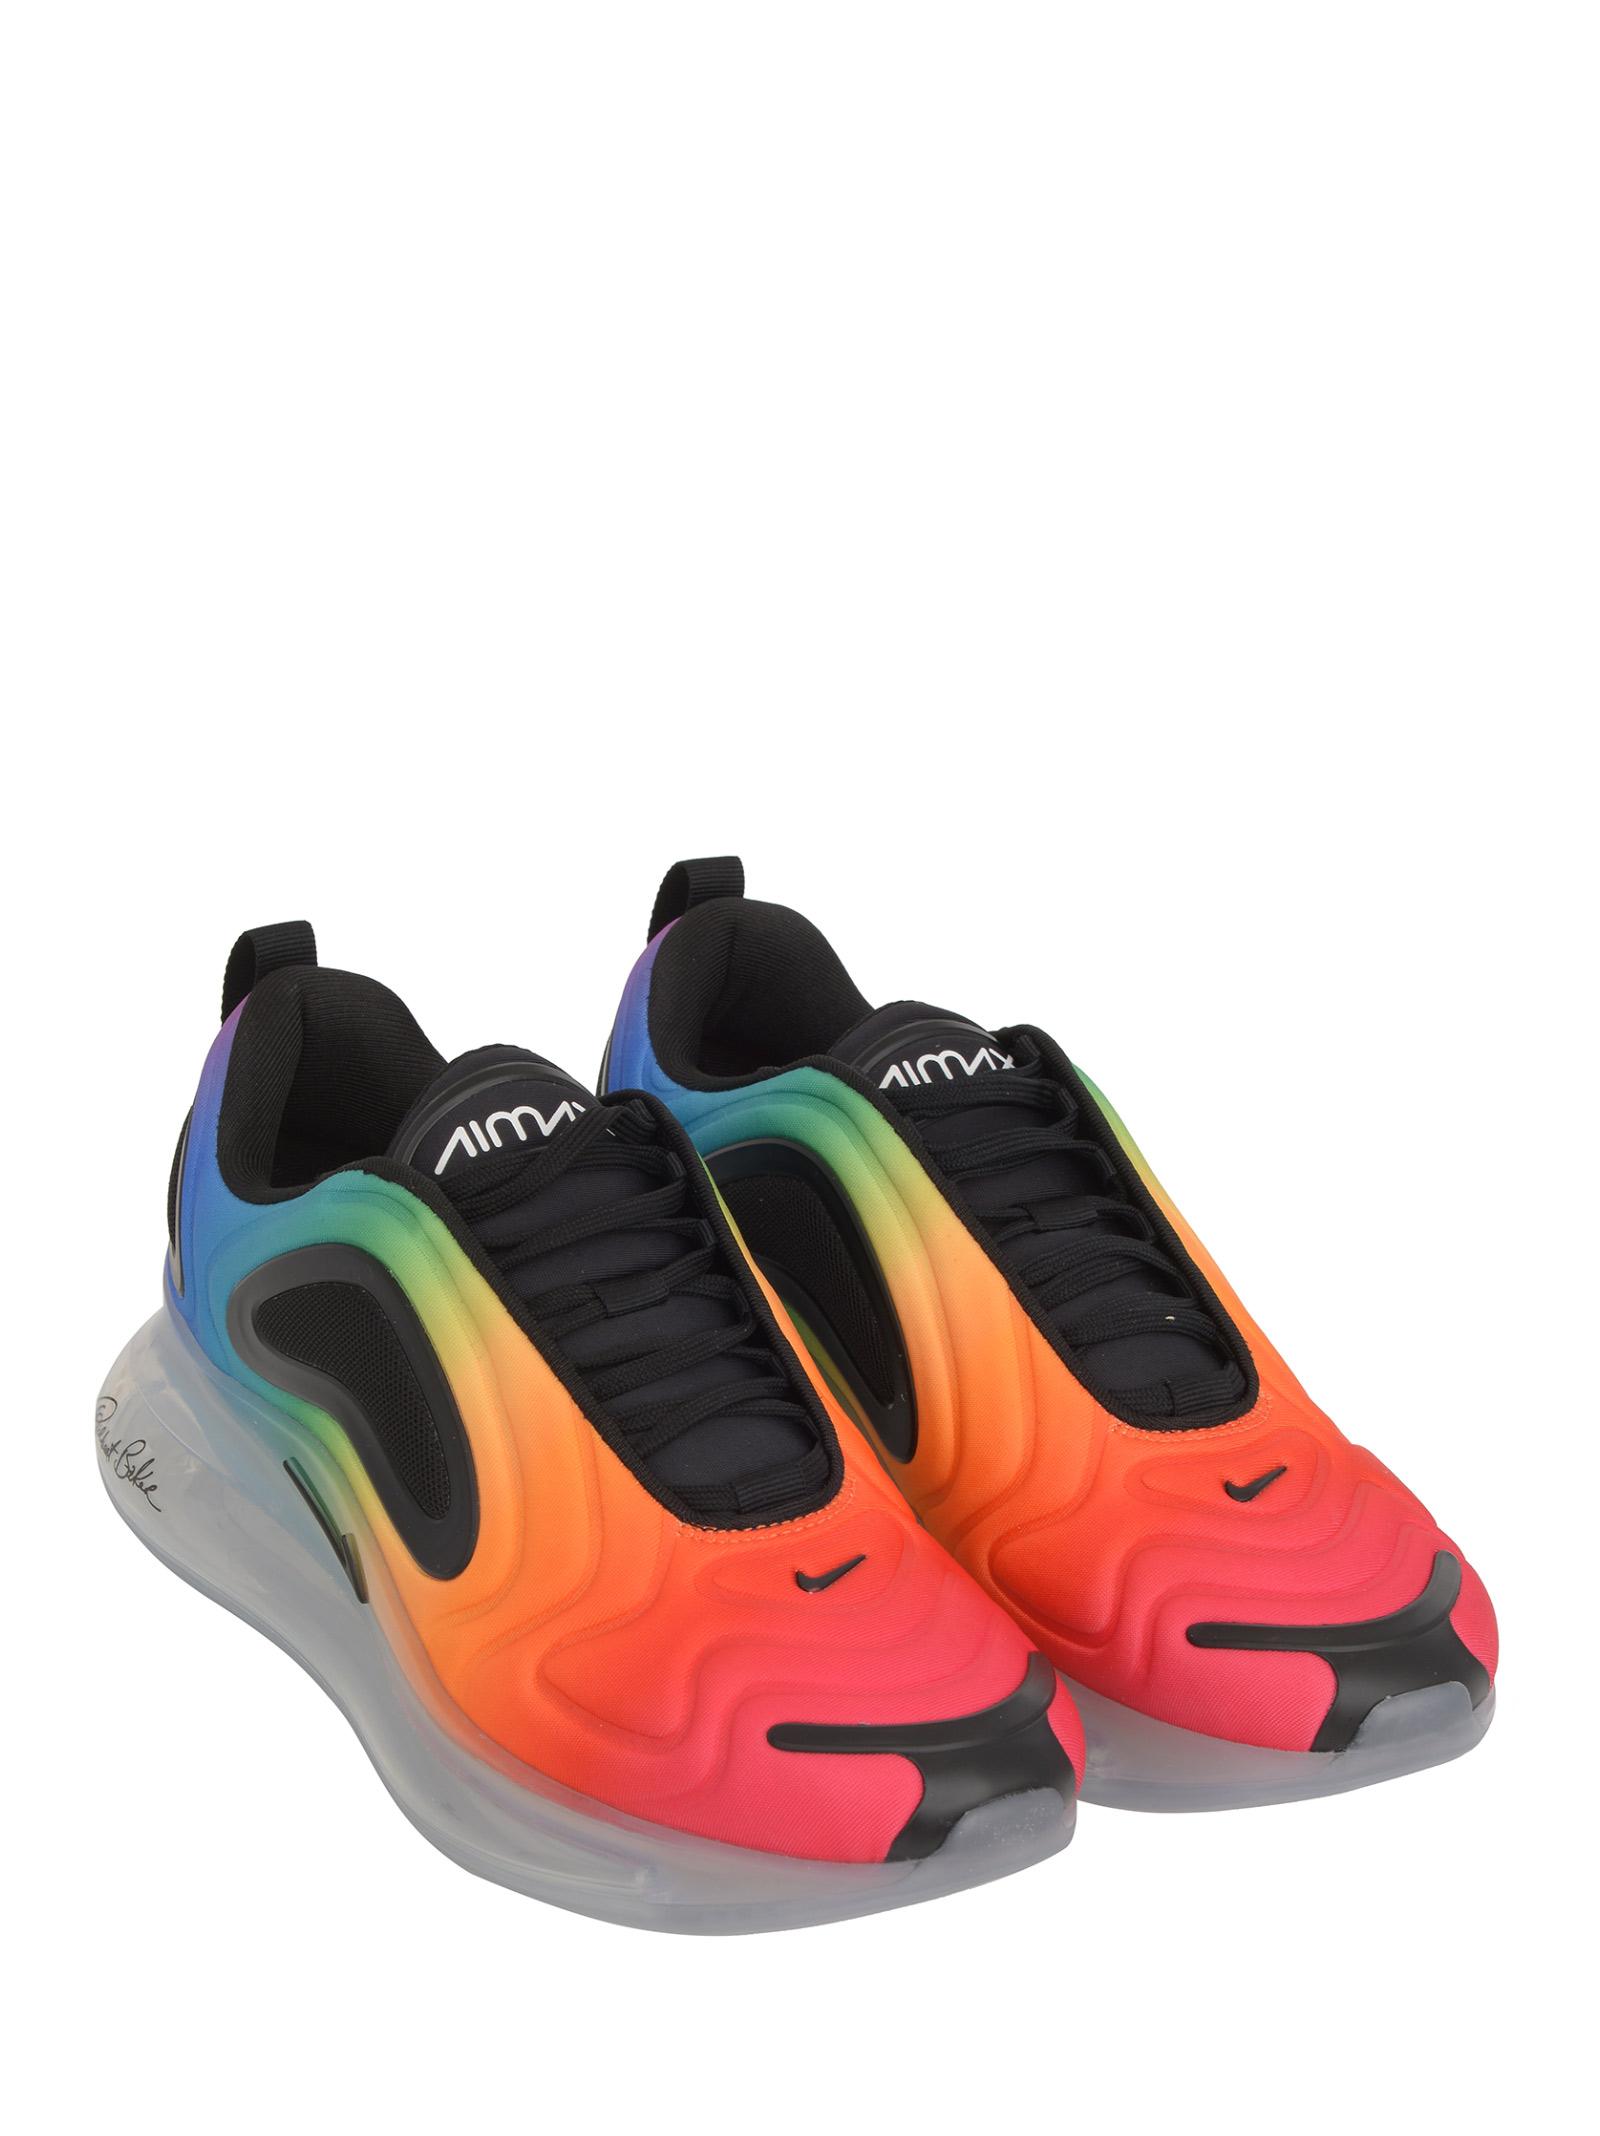 Nike Synthetic Air Max 720 Betrue Sneakers In Rainbow Colors With 